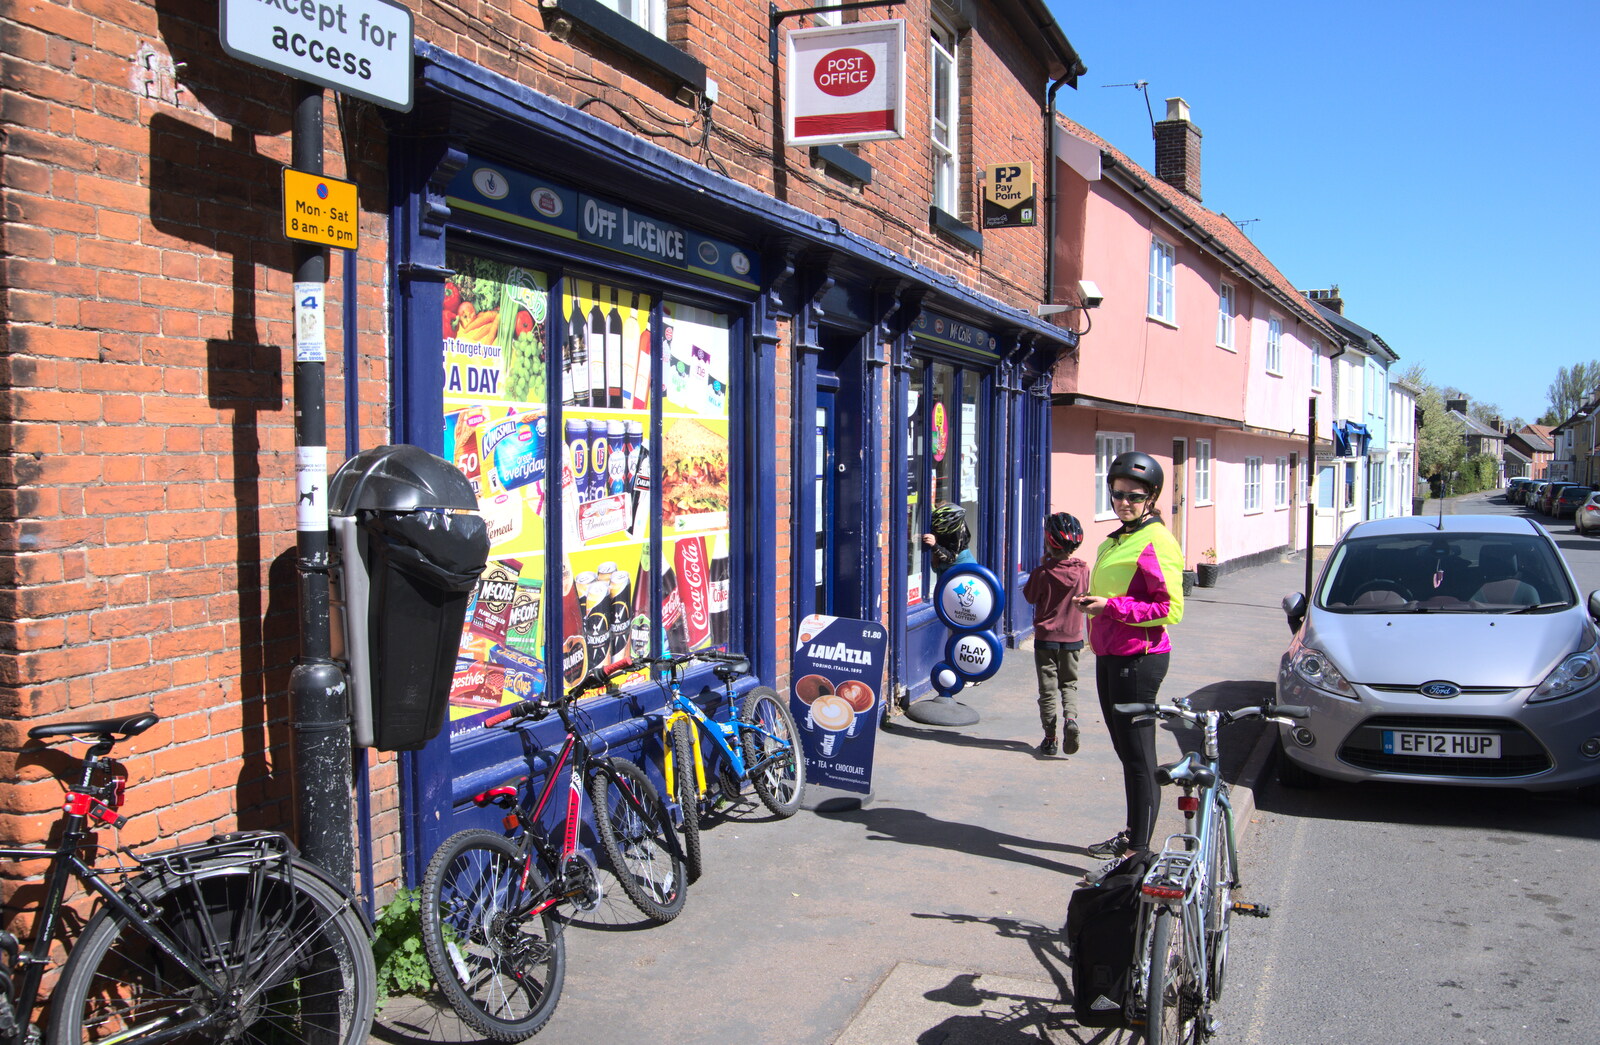 We stop off to pick up some ice creams from The Lockdown Desertion of Diss, and a Bike Ride up the Avenue, Brome - 19th April 2020